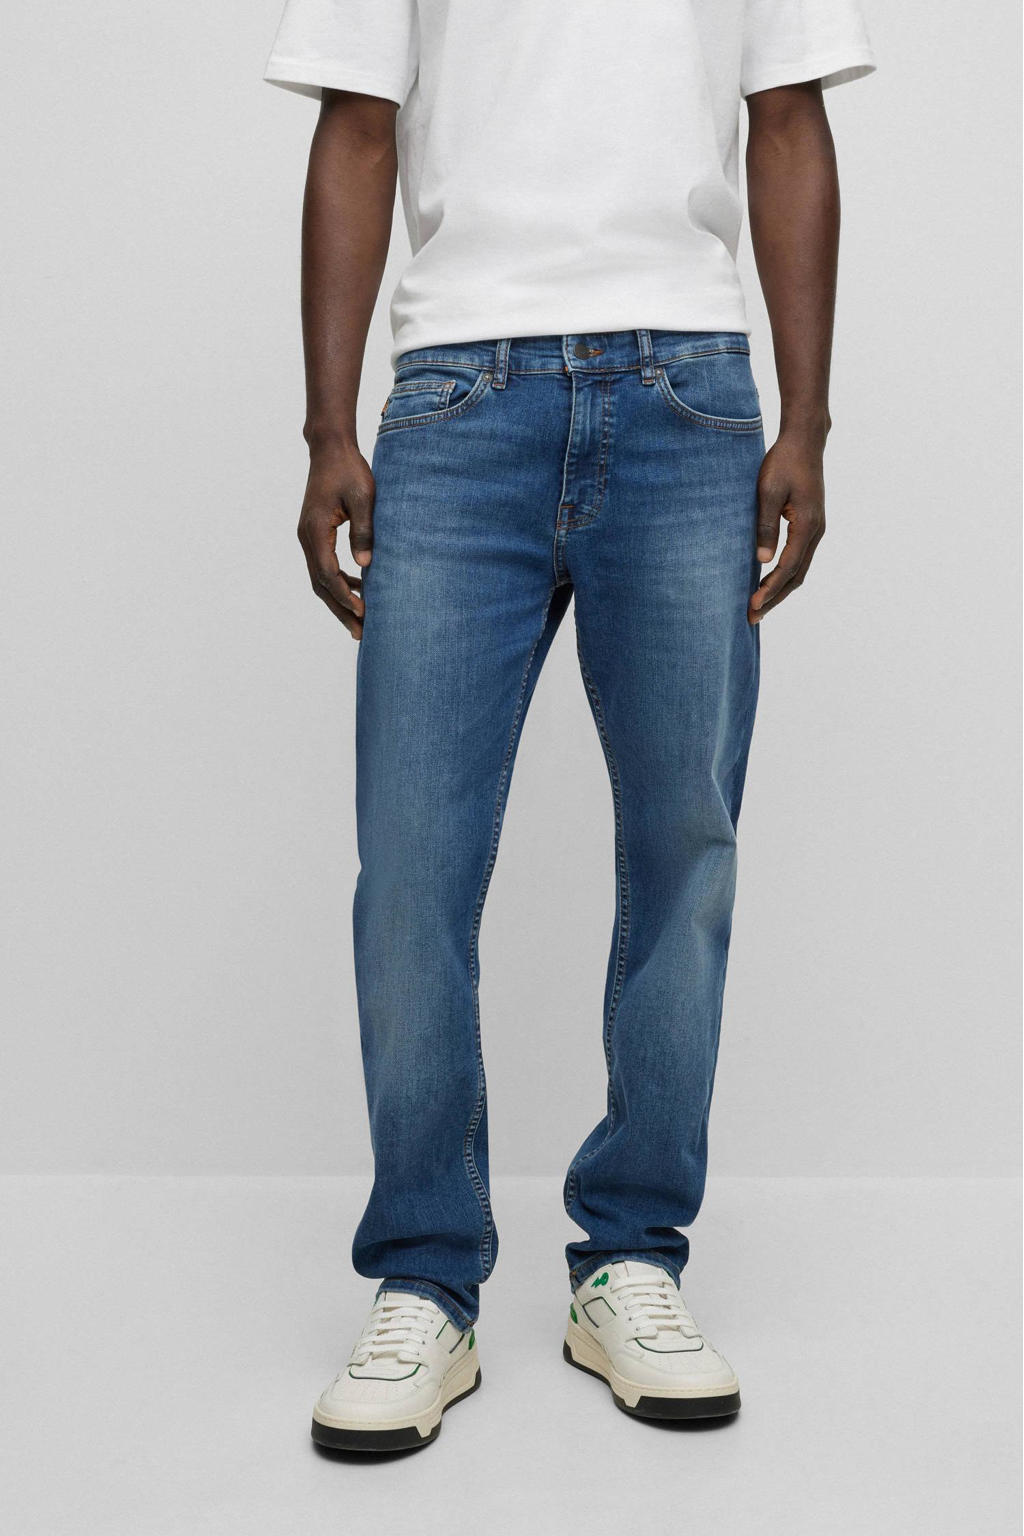 BOSS slim fit jeans Delaware BC-P bright blue